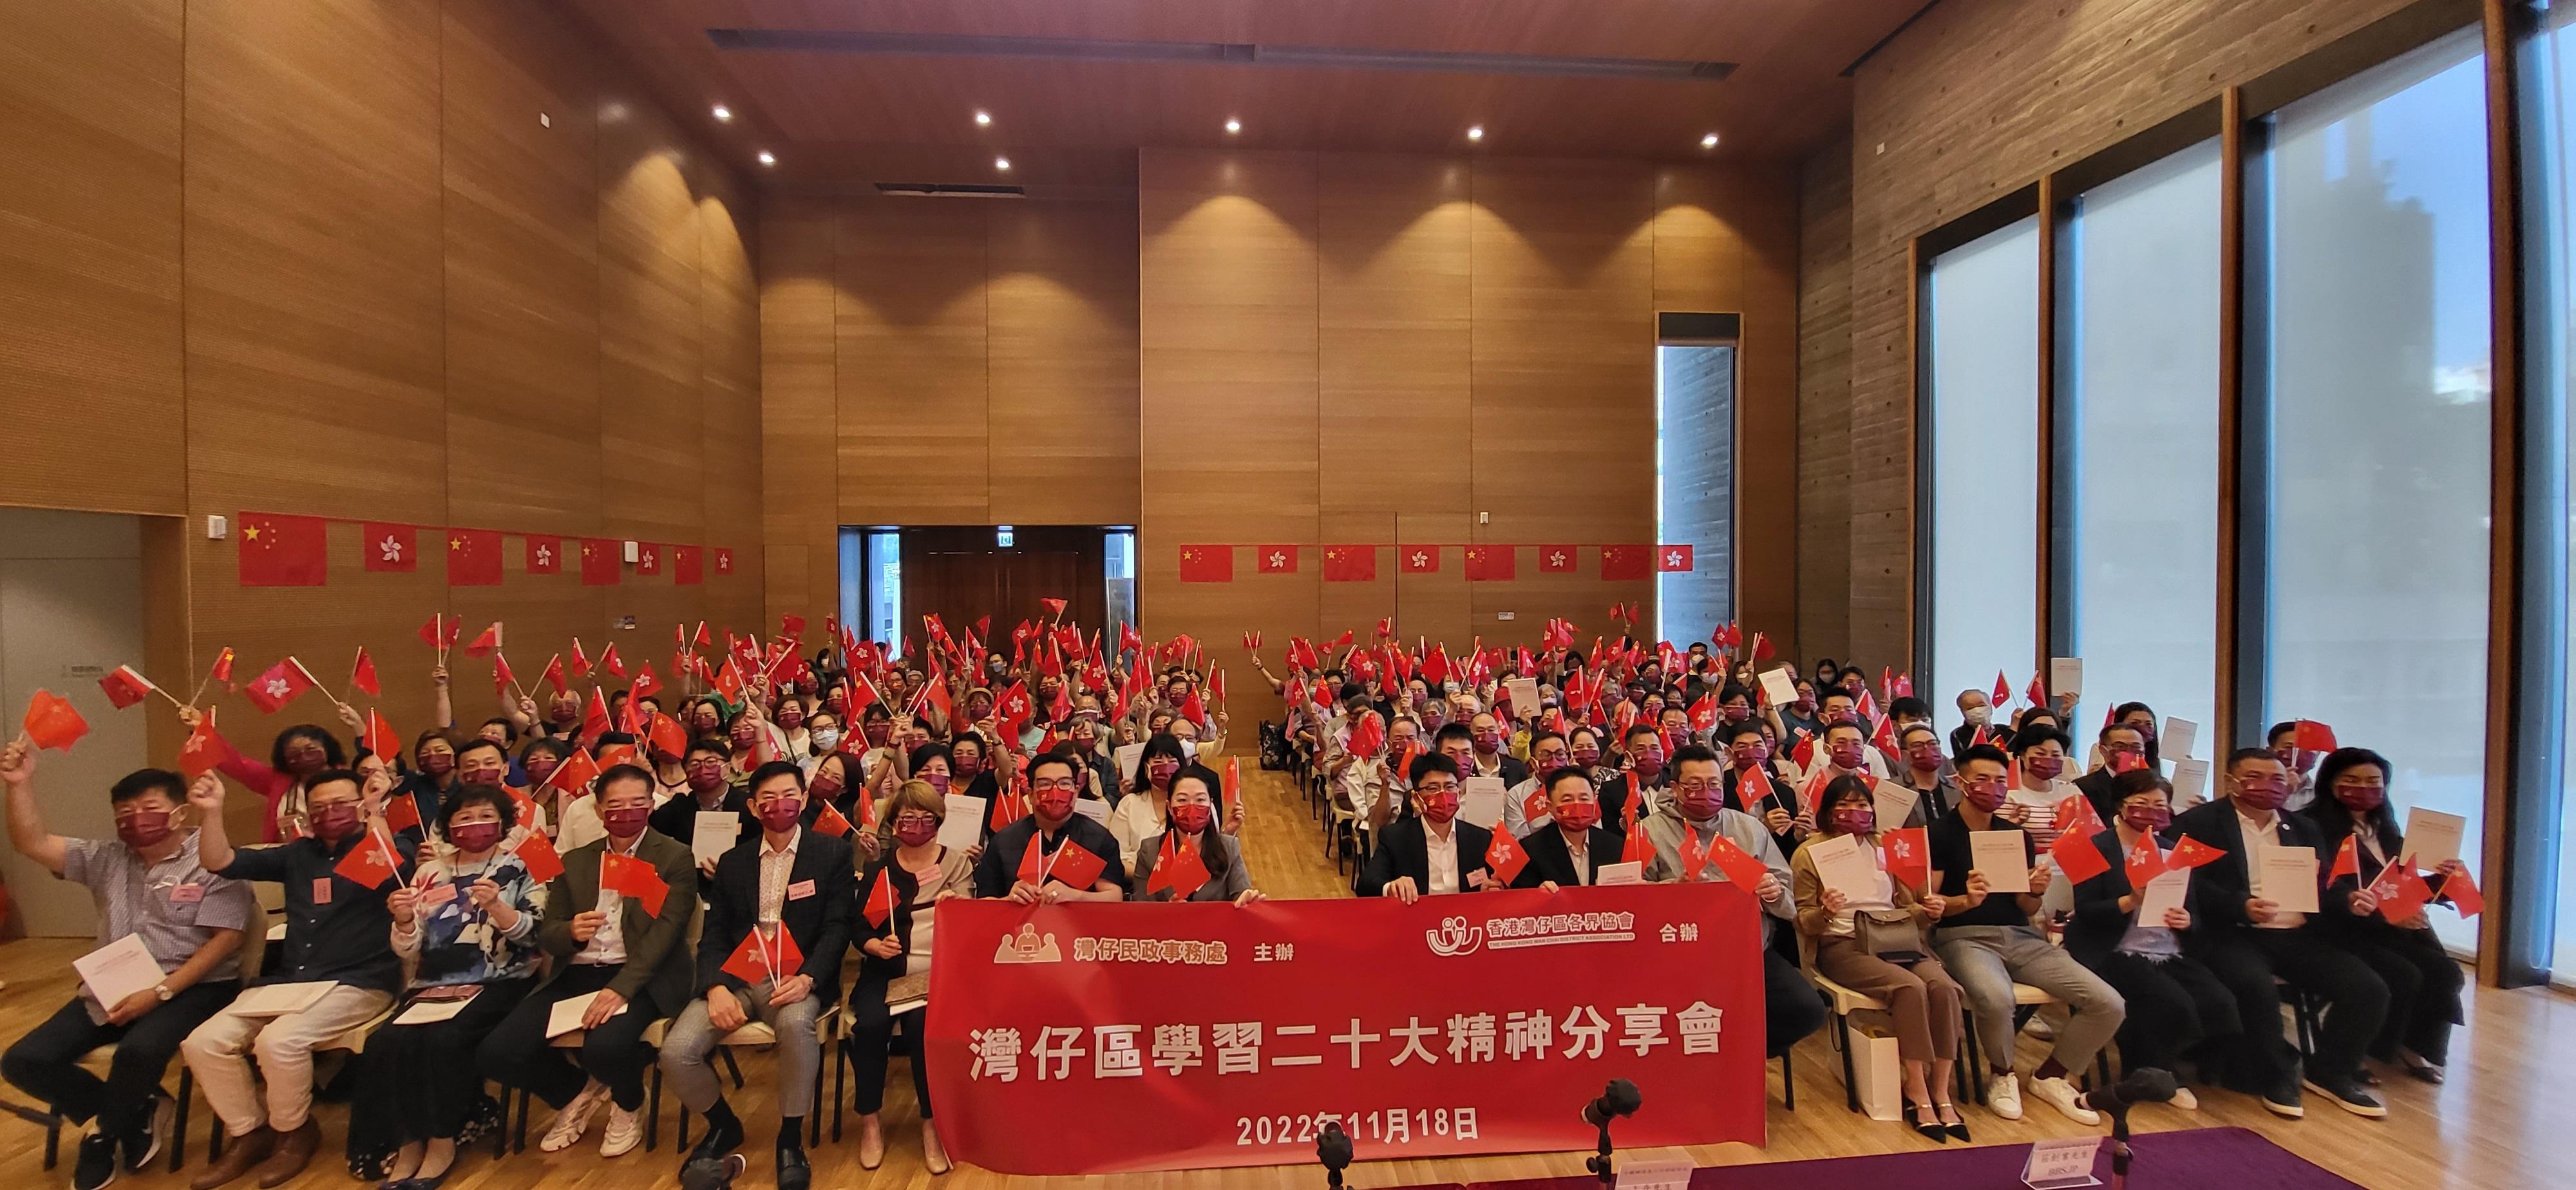 The Wan Chai District Office, together with the Hong Kong Wan Chai District Association, held a session on "Spirit of the 20th National Congress of the CPC" at Moreton Terrace Activities Centre on November 18. Photo shows the guests and the participants at the sharing session.